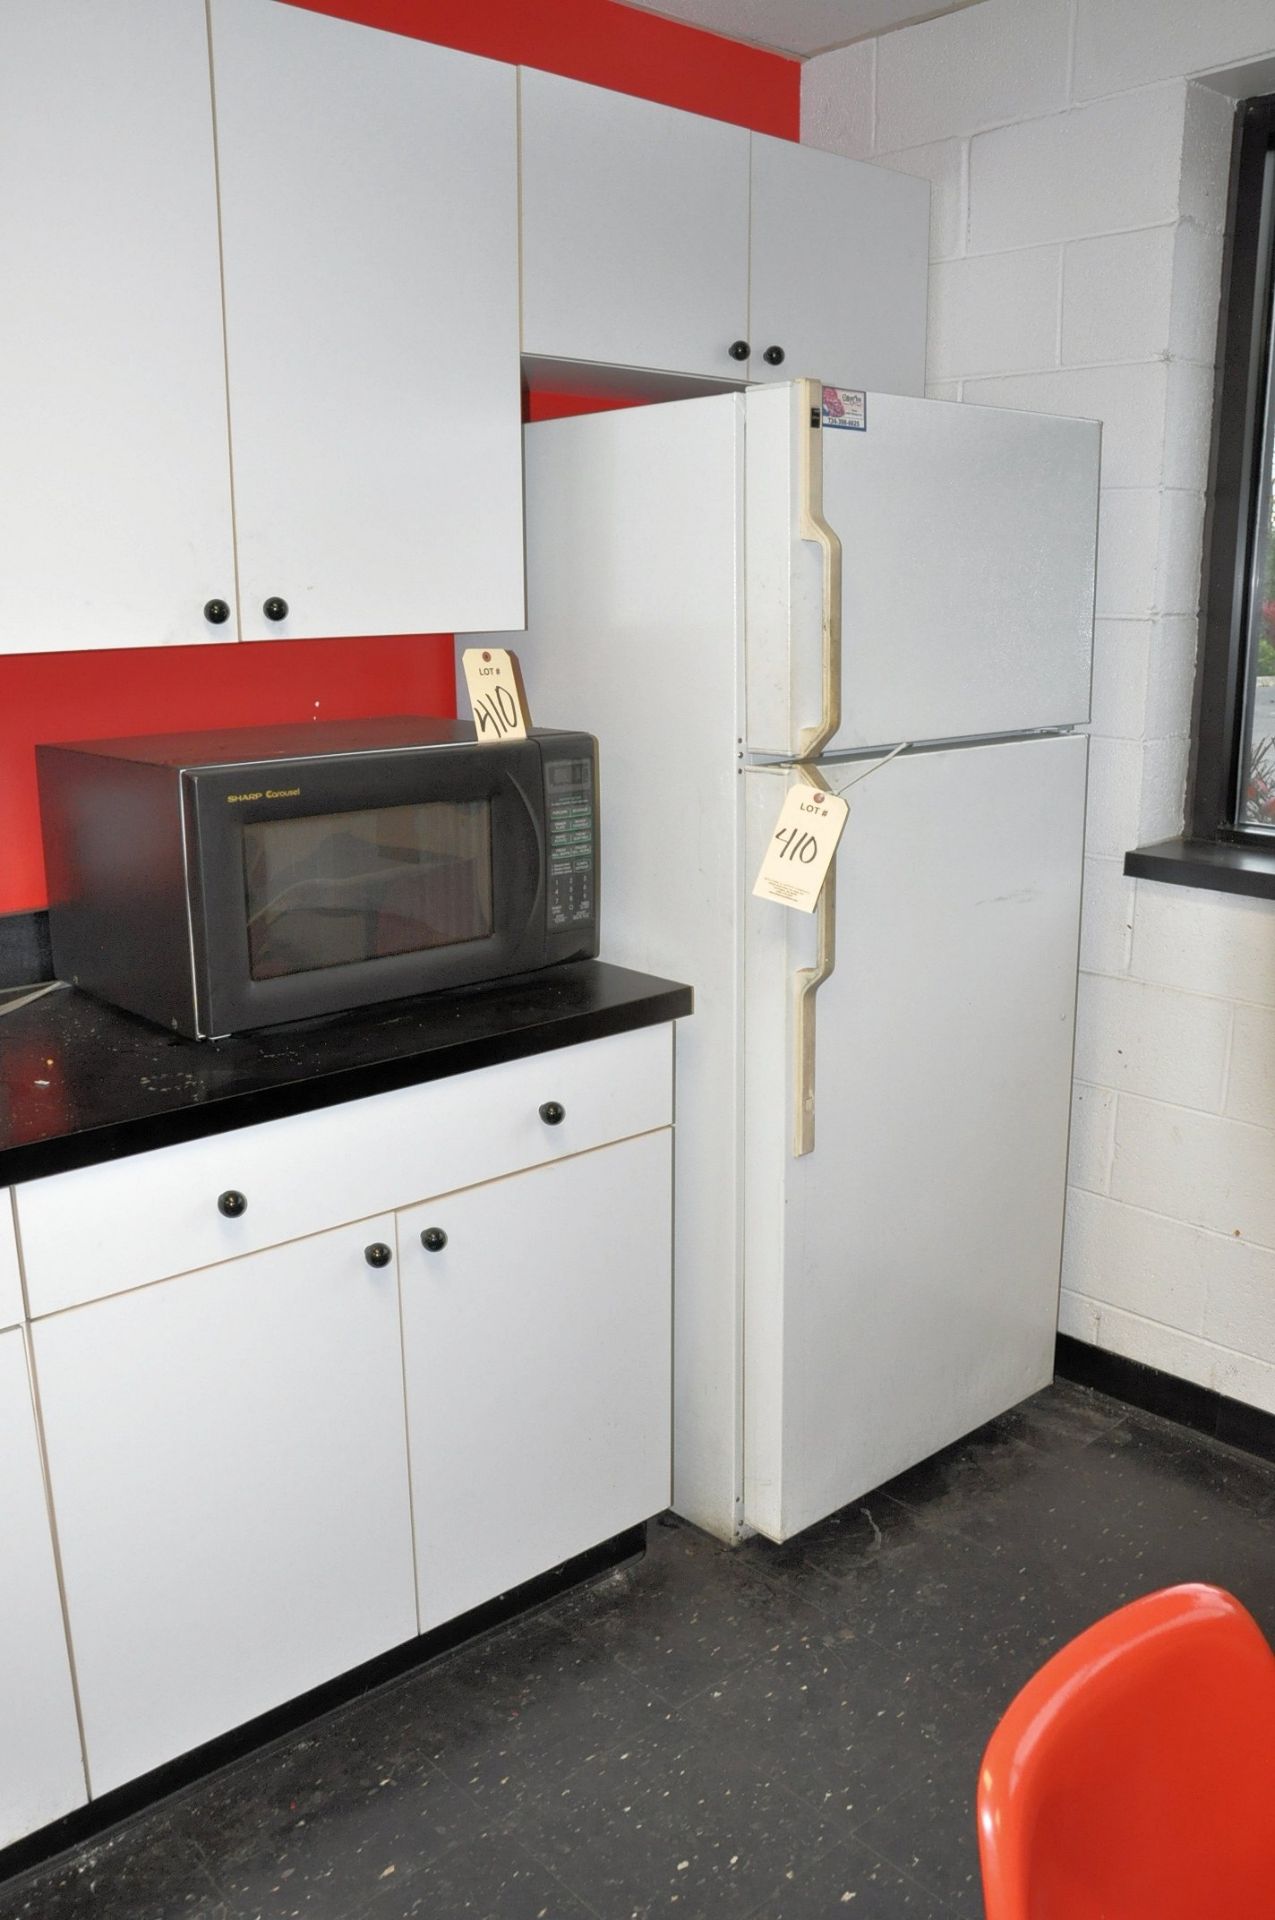 Lot-(1) HOTPOINT Refrigerator, (2) SHARP Carousel Microwaves, (1) GALANZ Microwave, (2) Cofee Makers